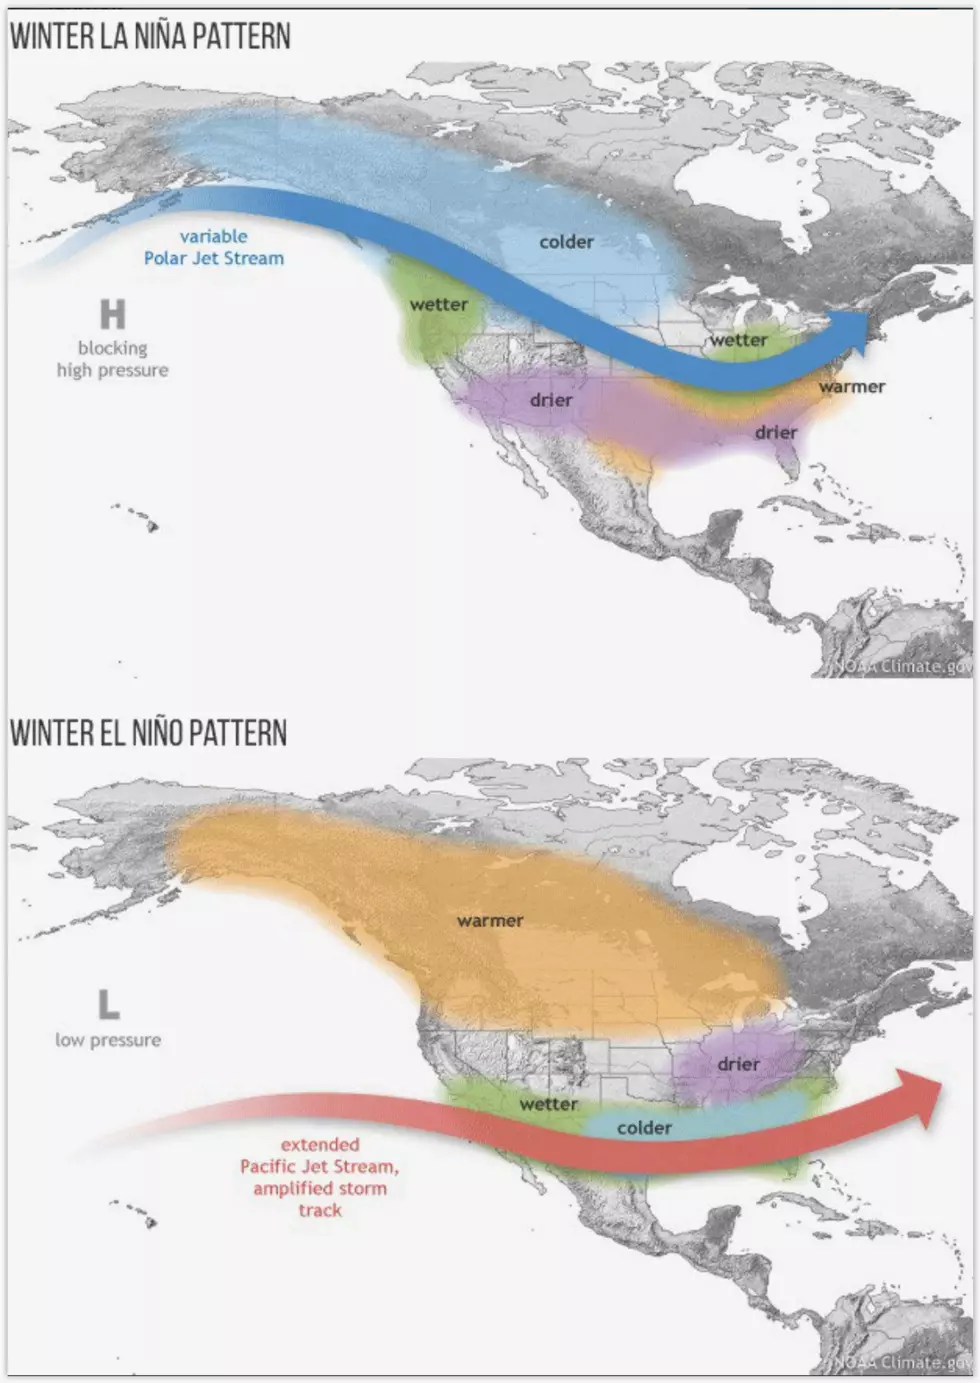 Maps Suddenly Look Like El Nino – What That Could Mean for The Northland’s Winter?